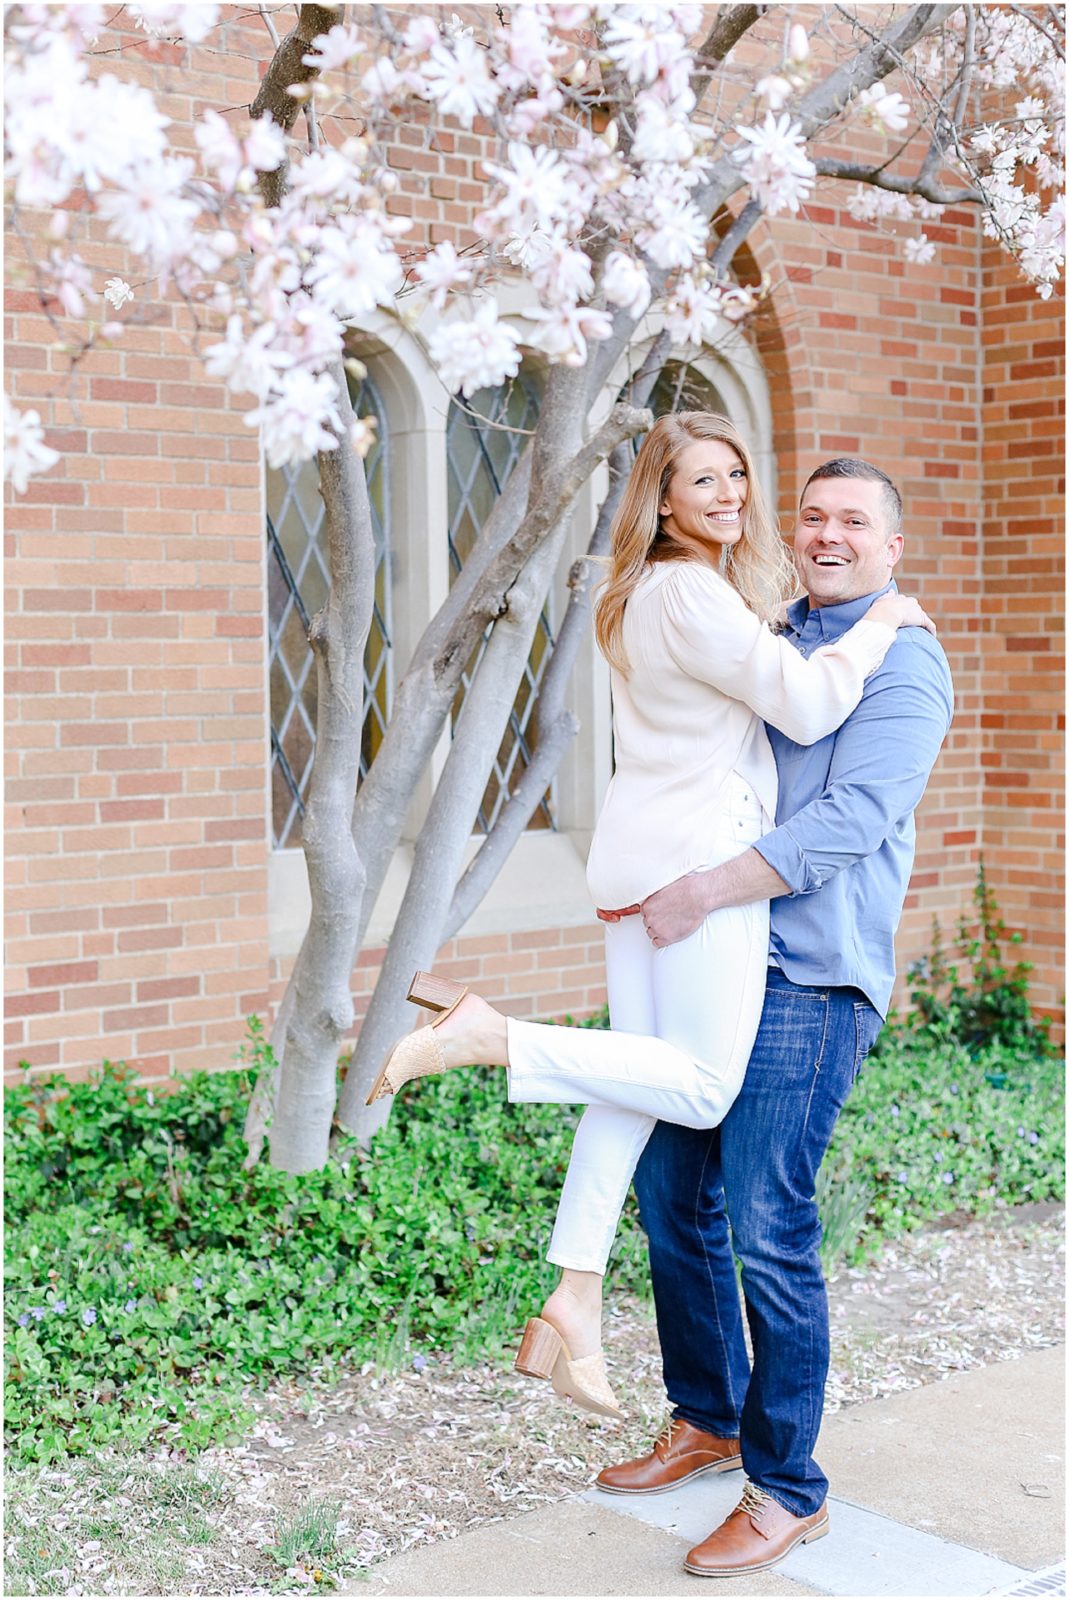 lifting his bride up - good poses for couples